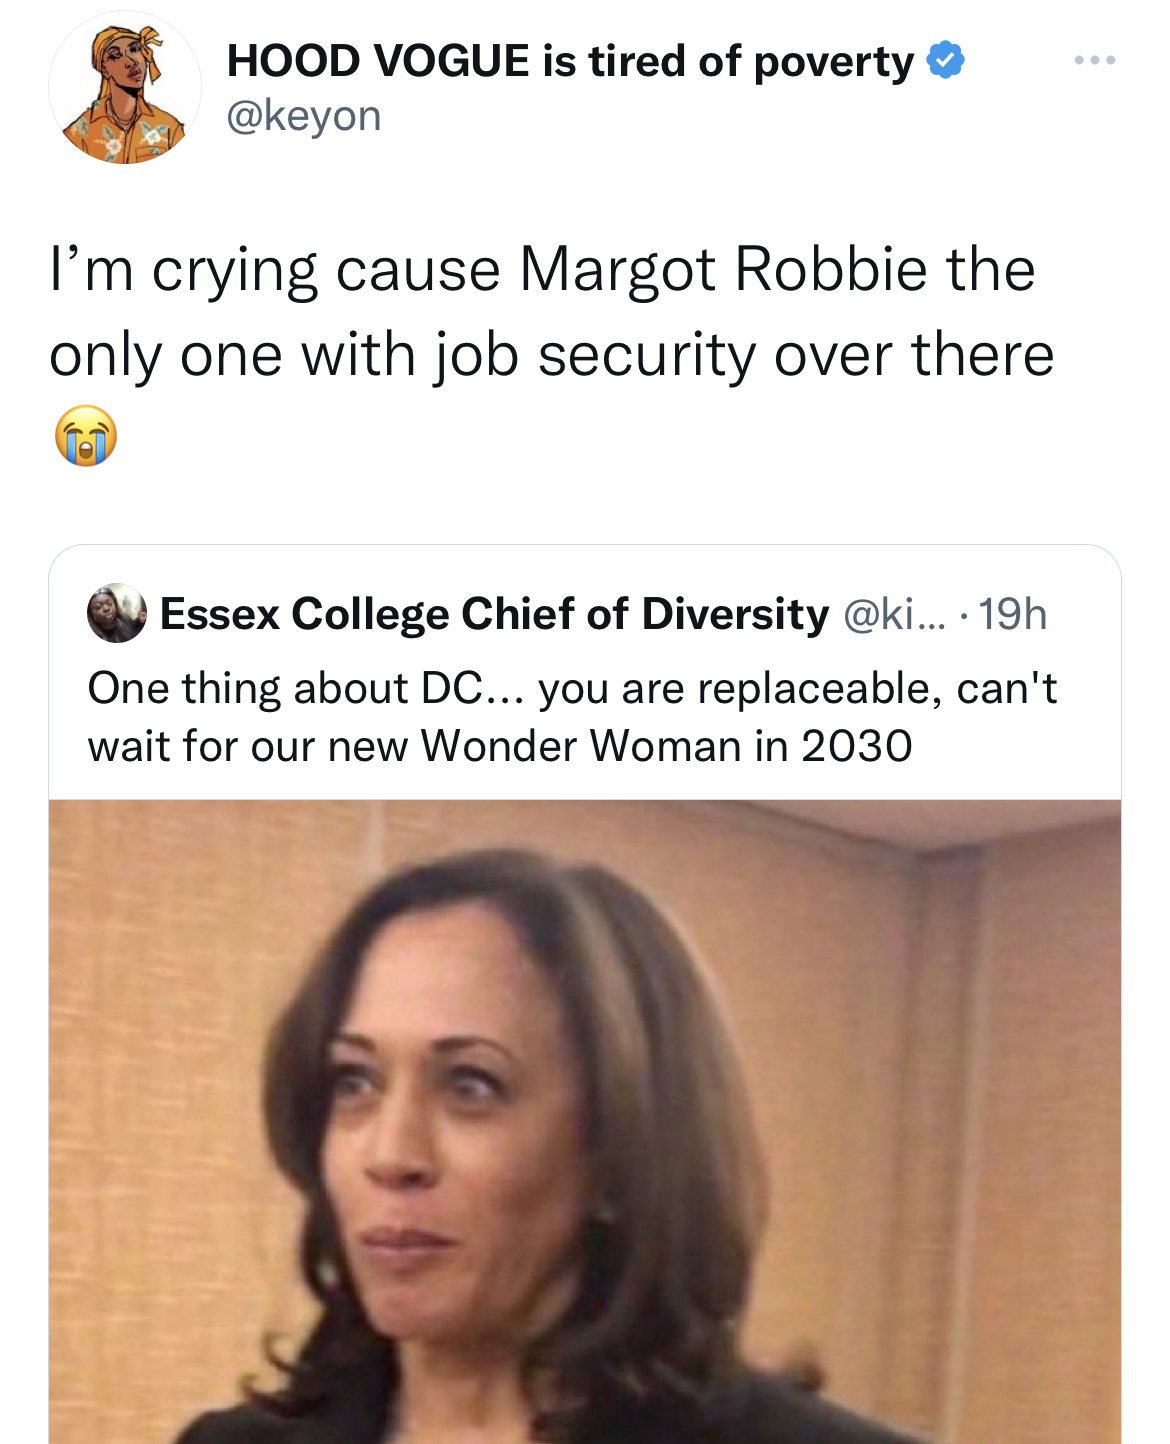 Tweets dunking on celebs - head - Hood Vogue is tired of poverty I'm crying cause Margot Robbie the only one with job security over there Essex College Chief of Diversity .... 19h One thing about Dc... you are replaceable, can't wait for our new Wonder Wo